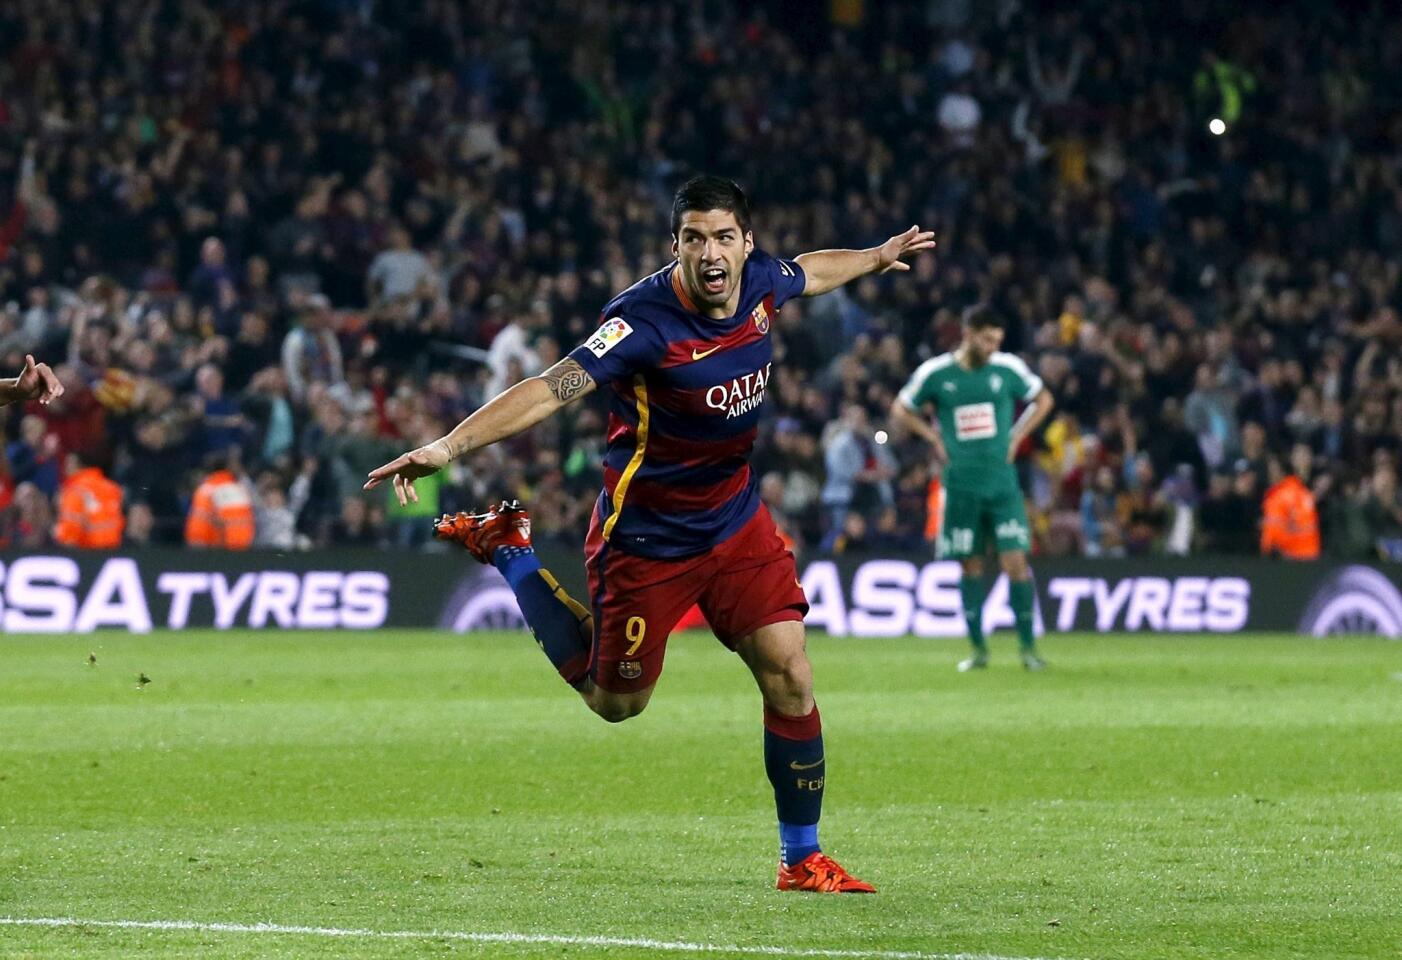 Barcelona's Luis Suarez celebrates his second goal against Eibar during their Spanish first division soccer match at Camp Nou stadium in Barcelona